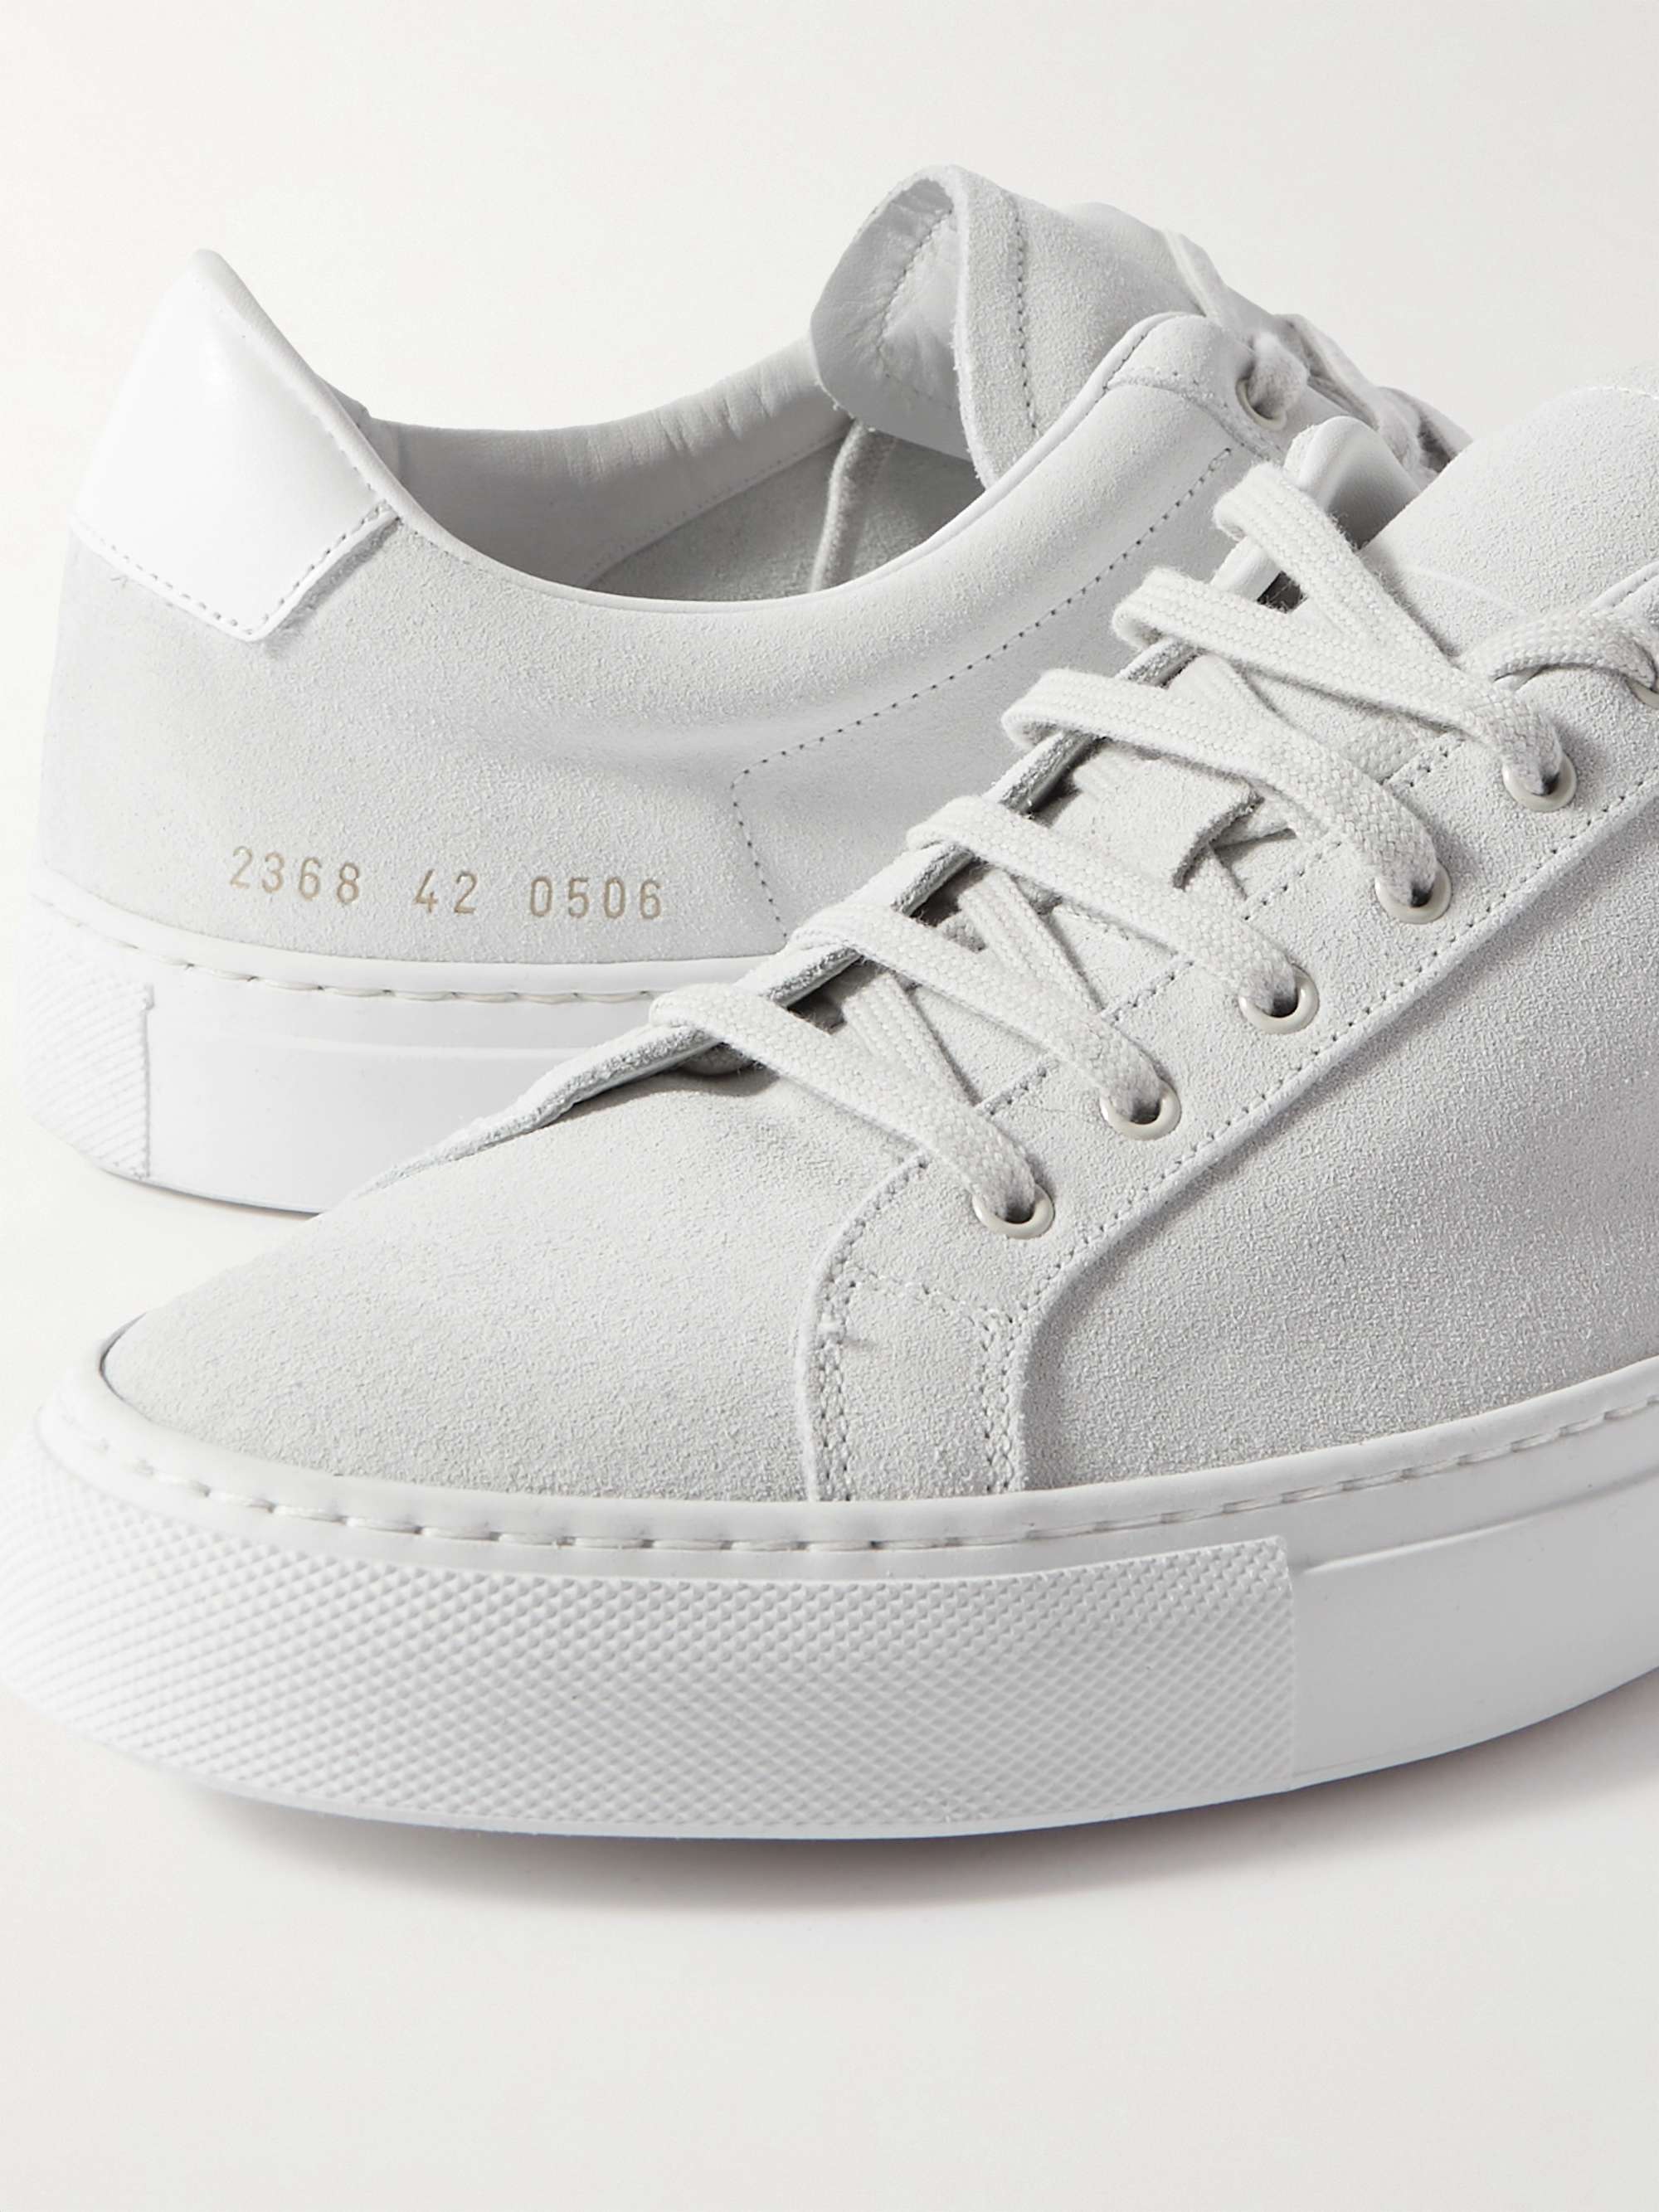 COMMON PROJECTS Retro Low Leather-Trimmed Suede Sneakers